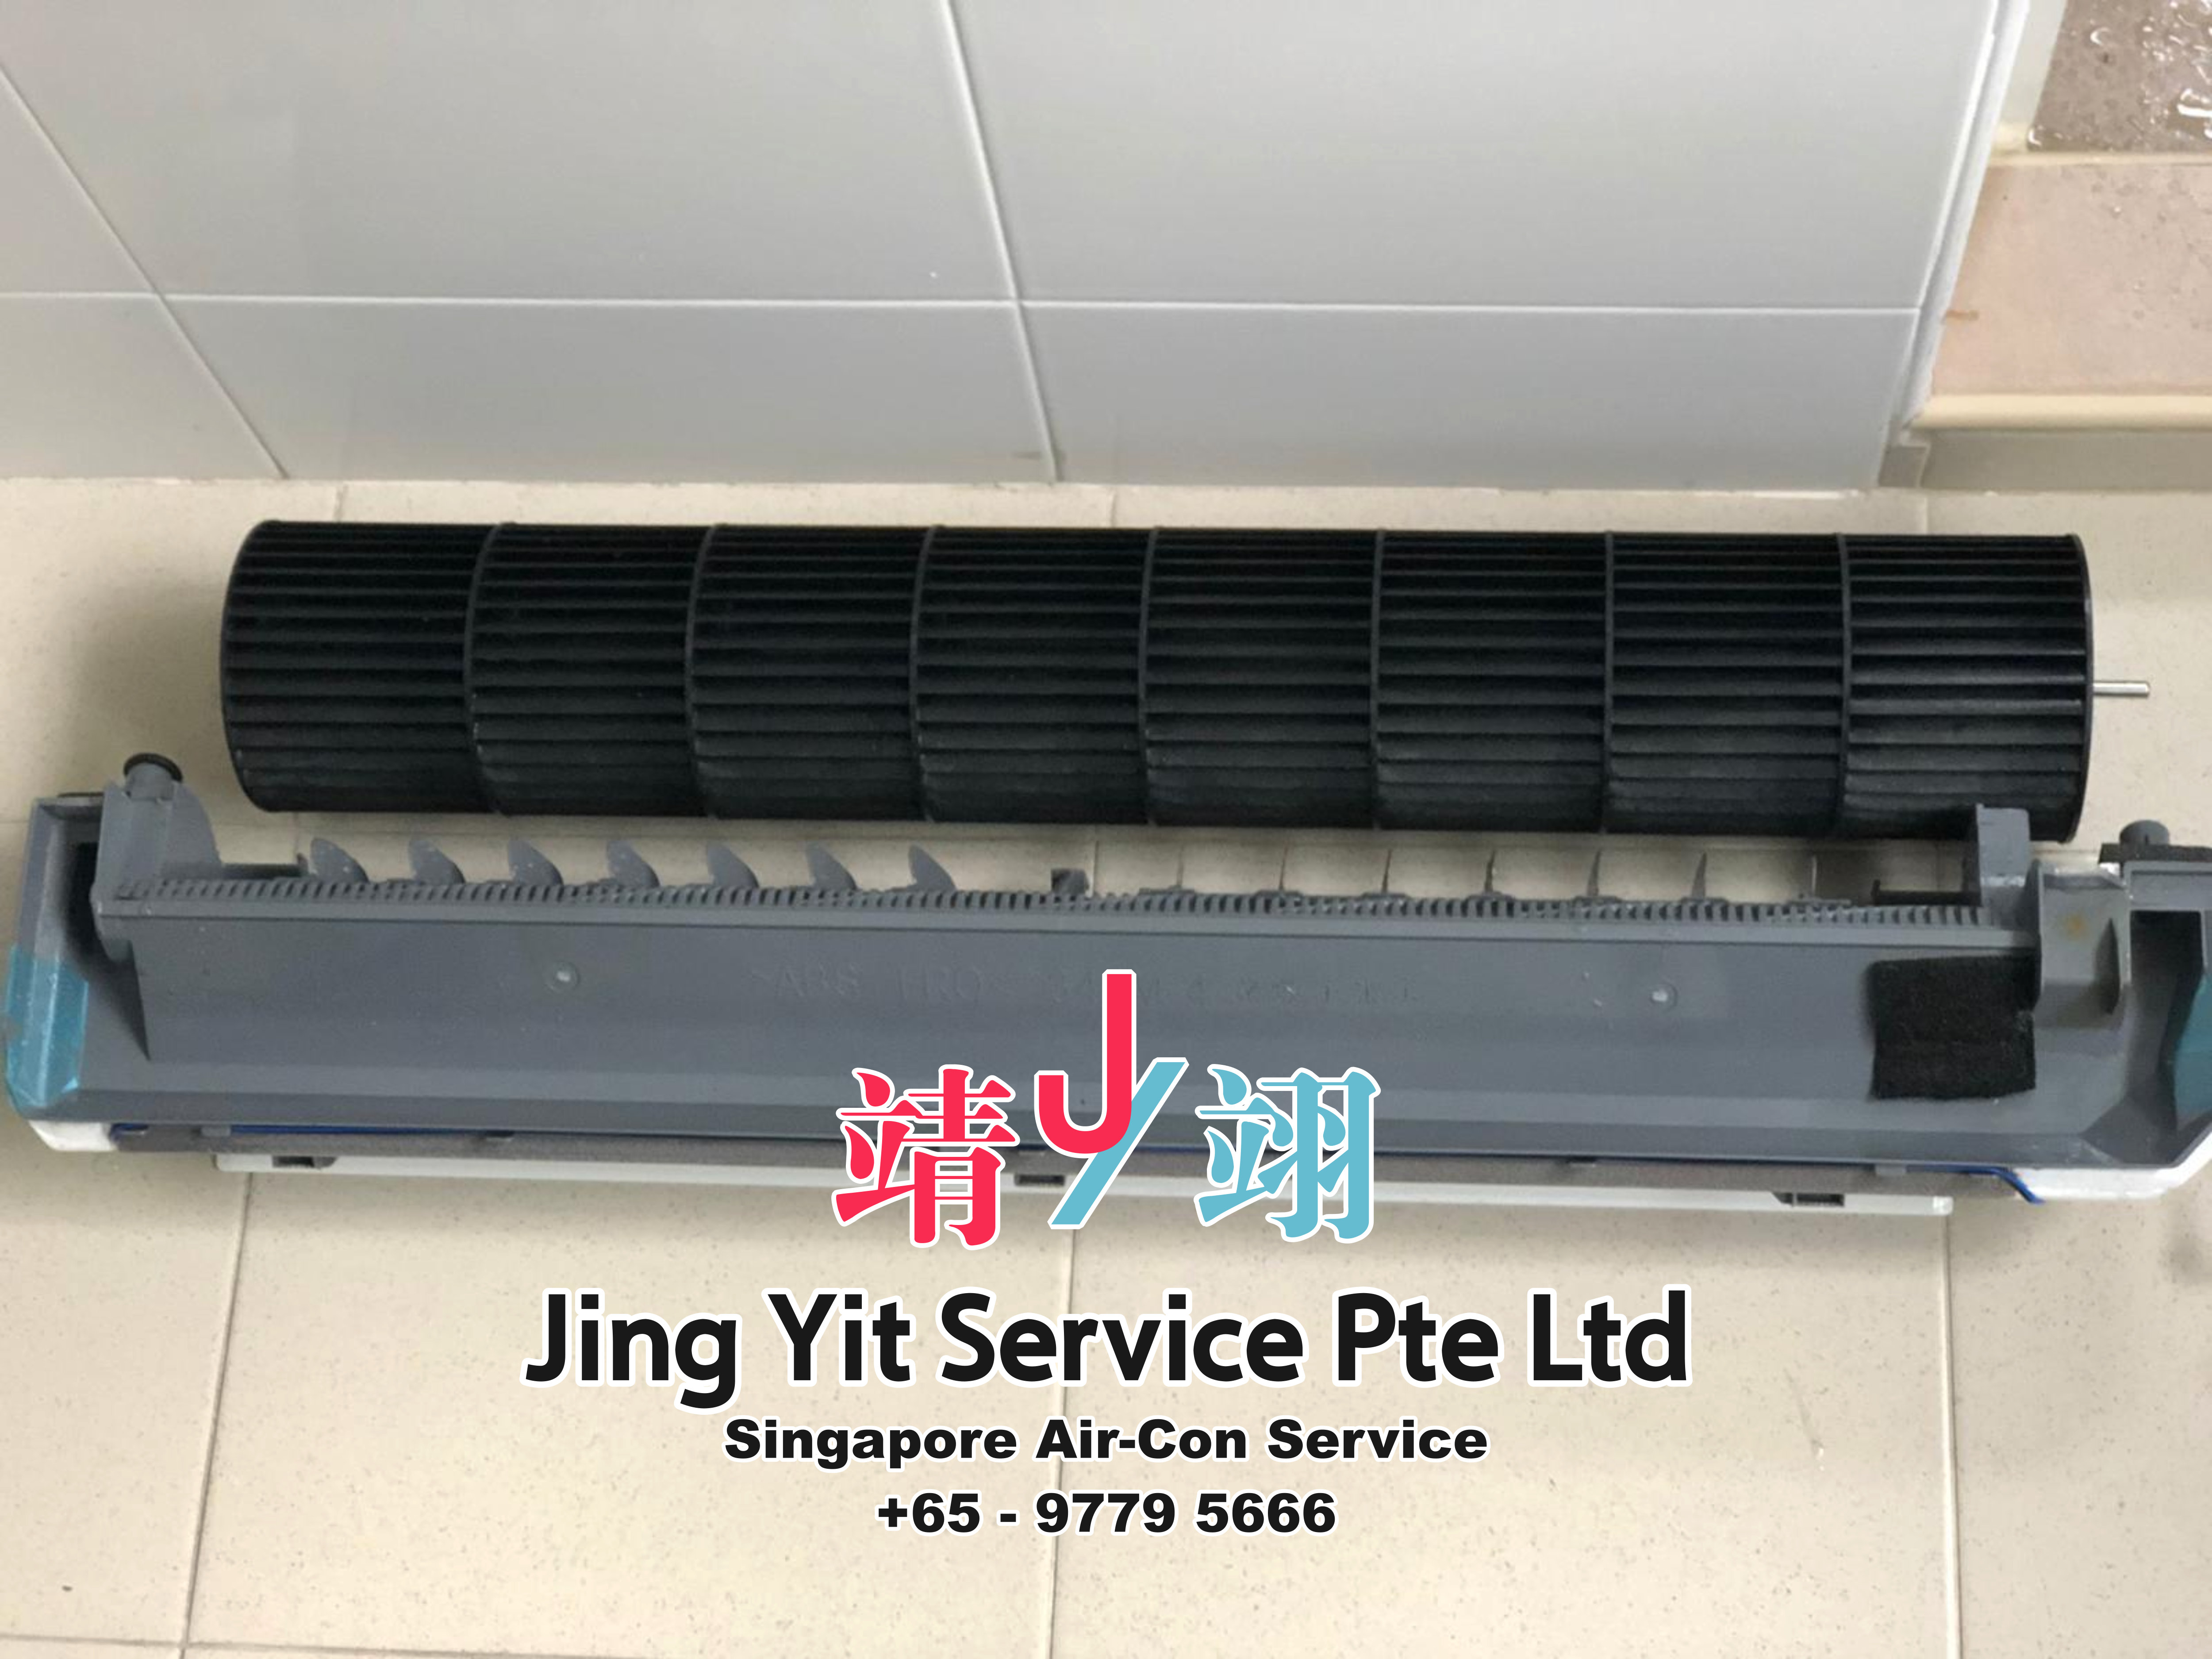 Singapore AirCon Service Air Conditioning Cleaning Repairing and Installation Air-con Gas Refill Aircon Chemical Wash Singapore Jing Yit Service Pte Ltd A02-22